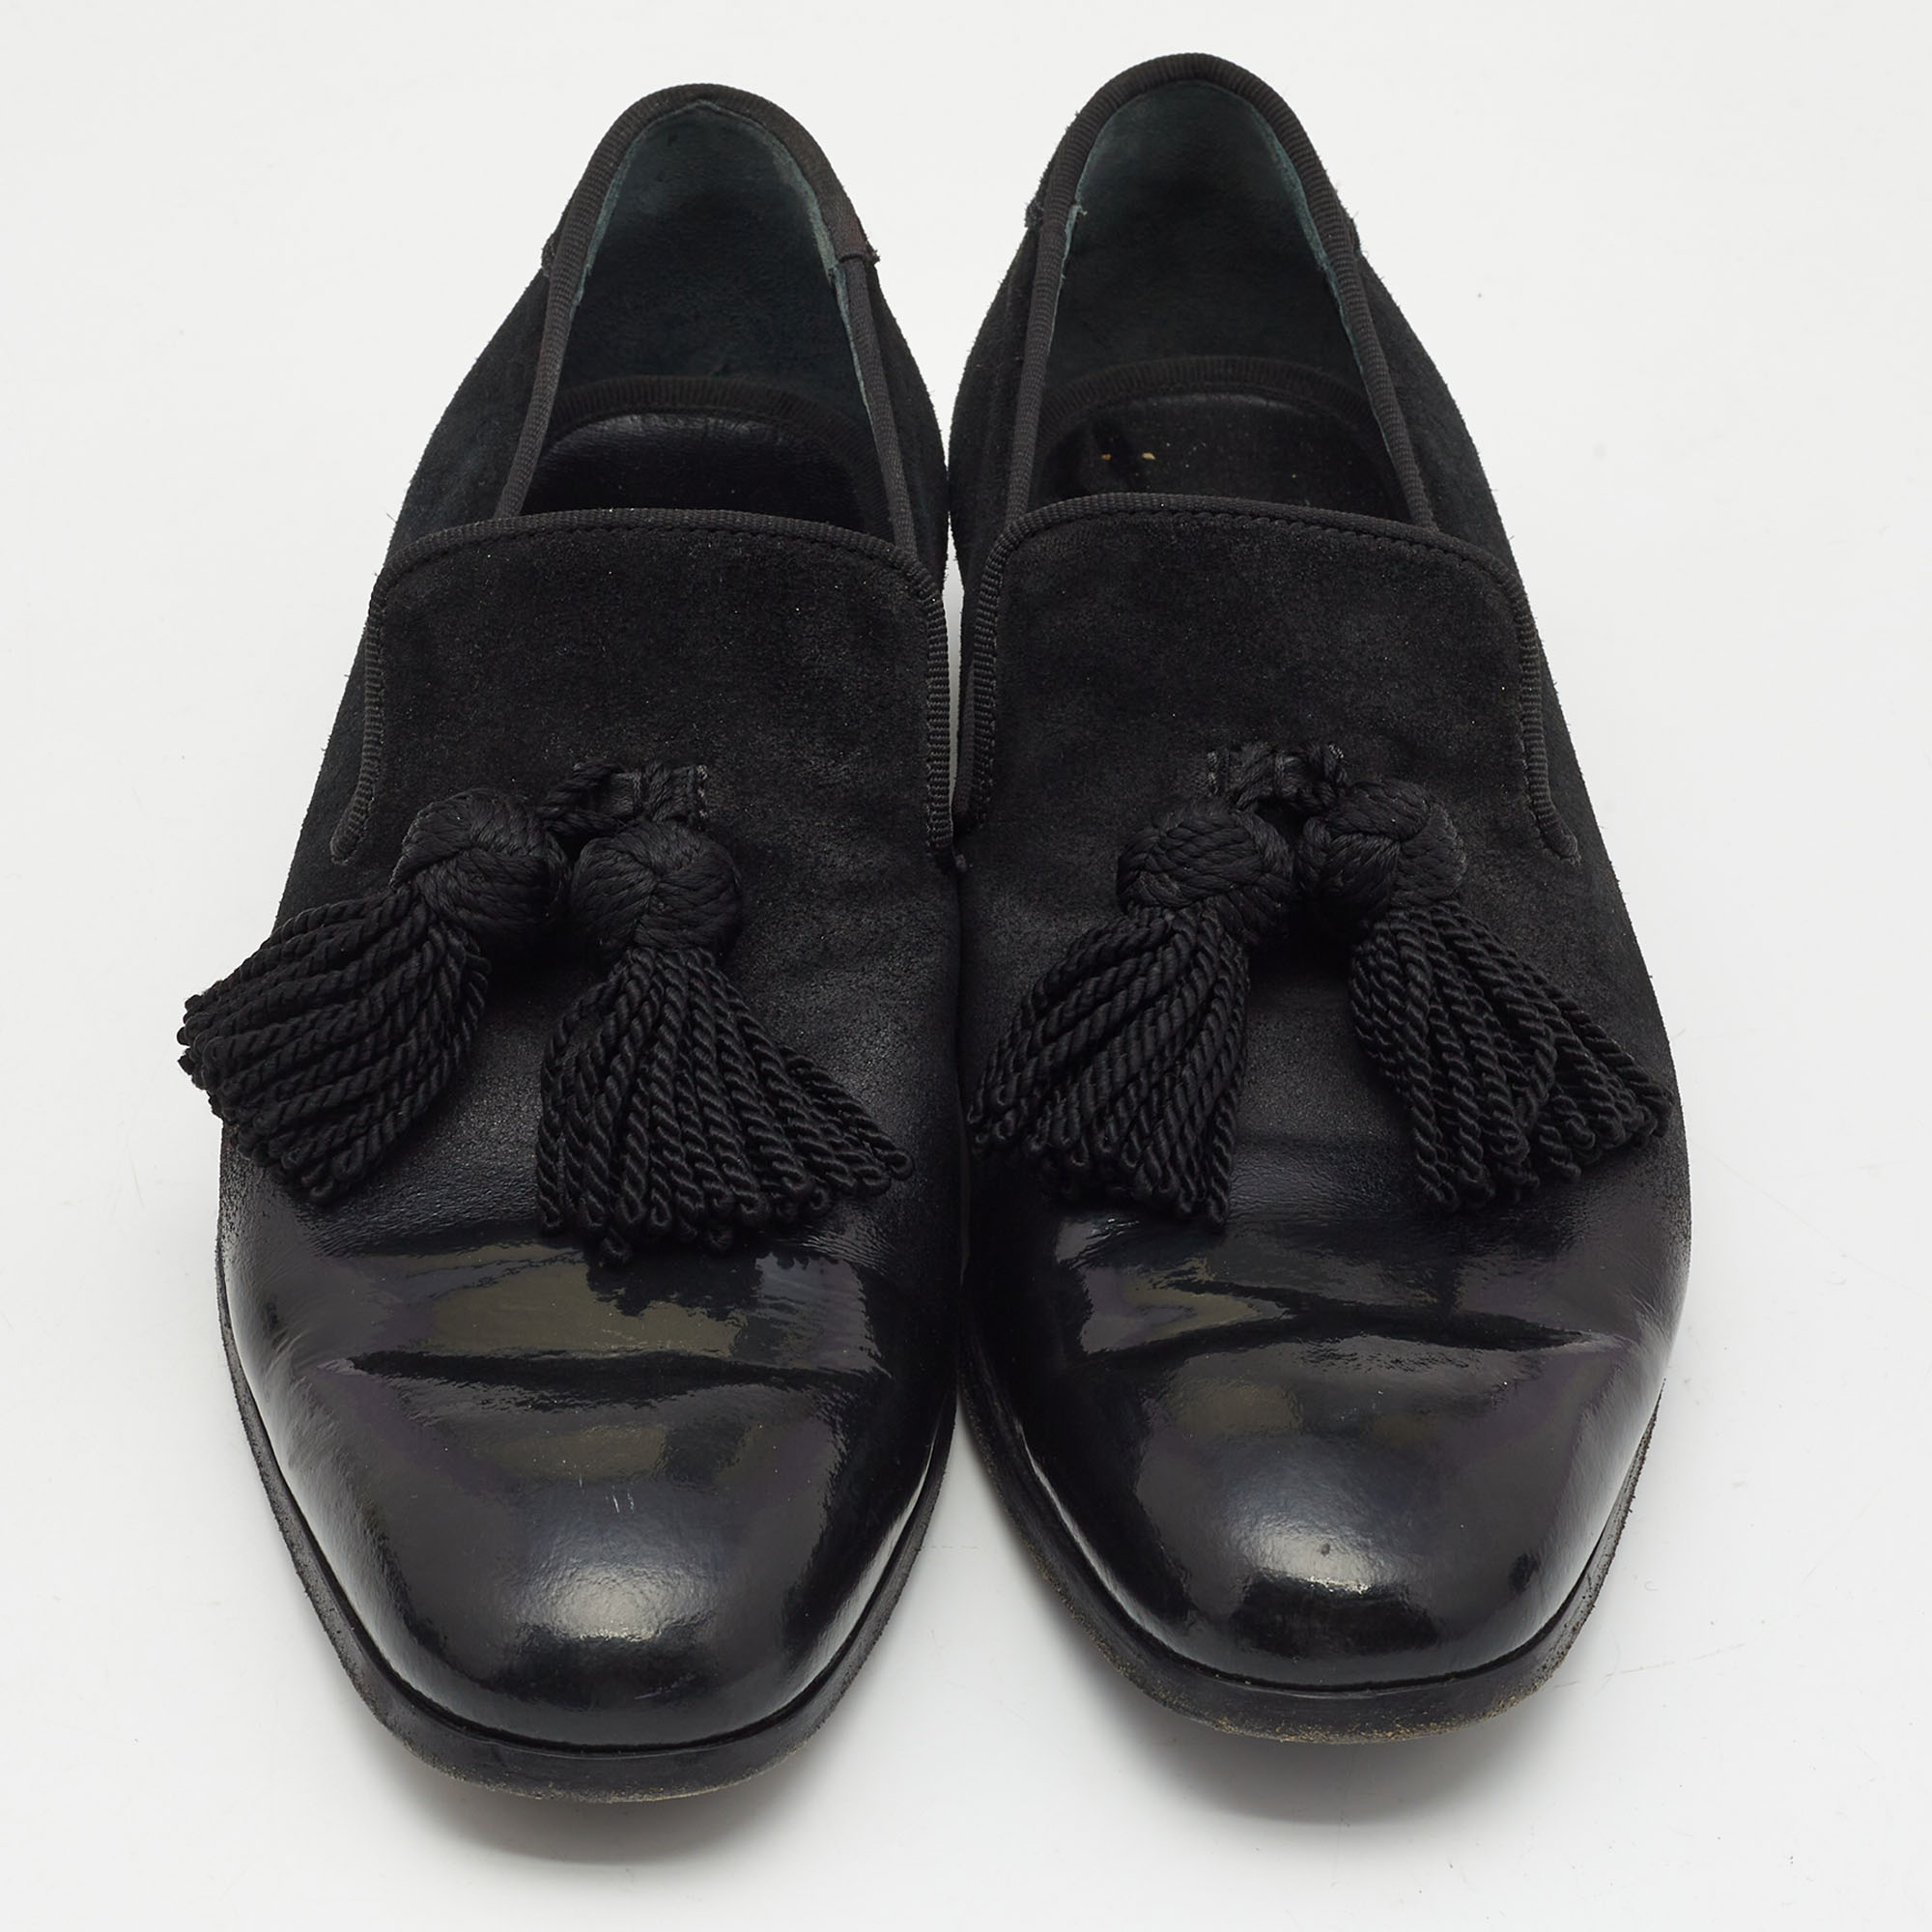 Jimmy Choo Black Suede And Leather Foxley Tassel Loafers Size 42